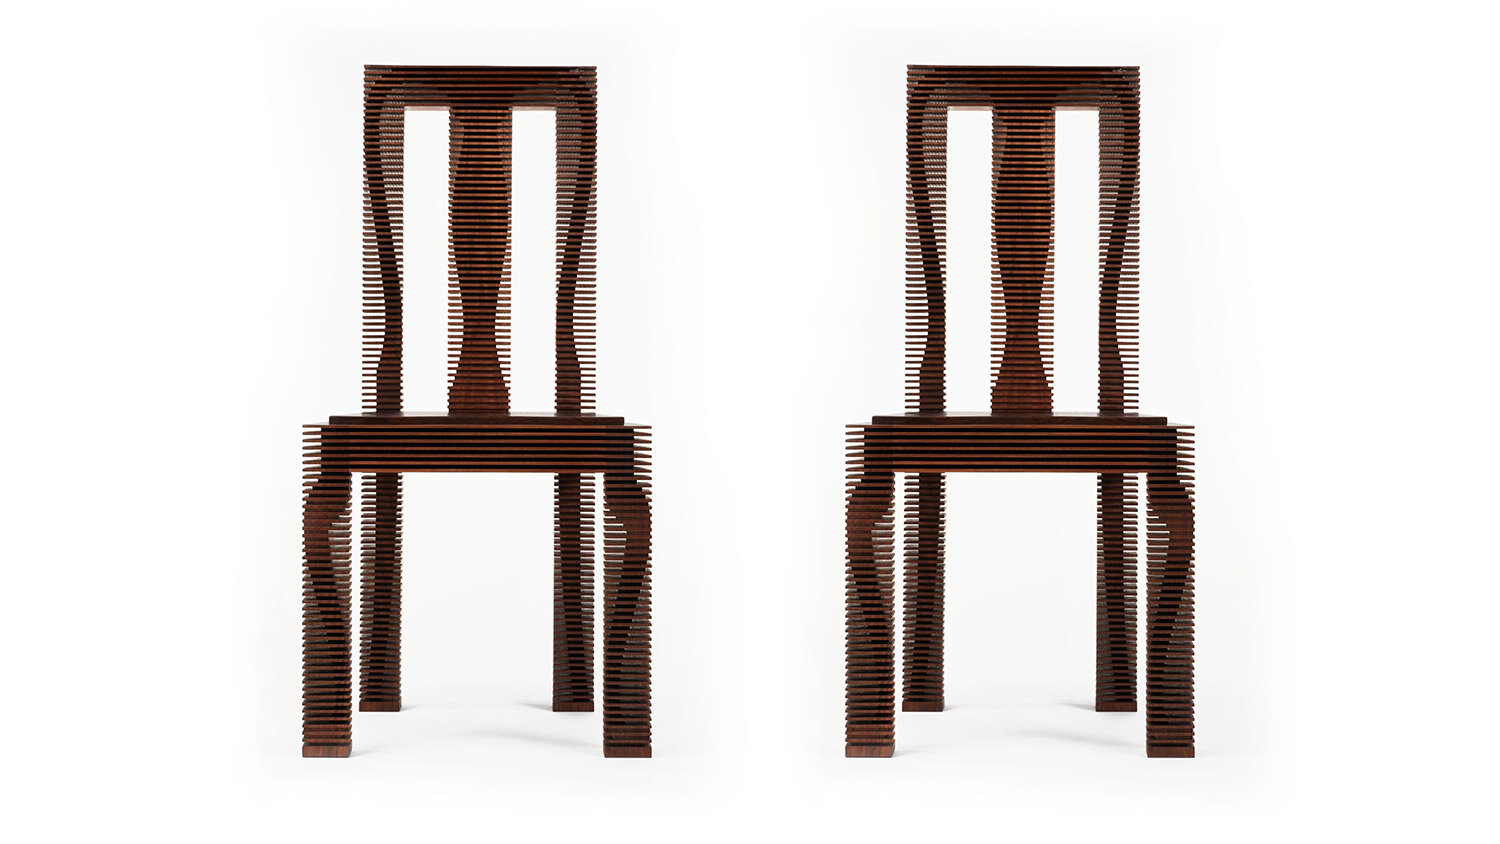 A pair of digital fabricated chairs